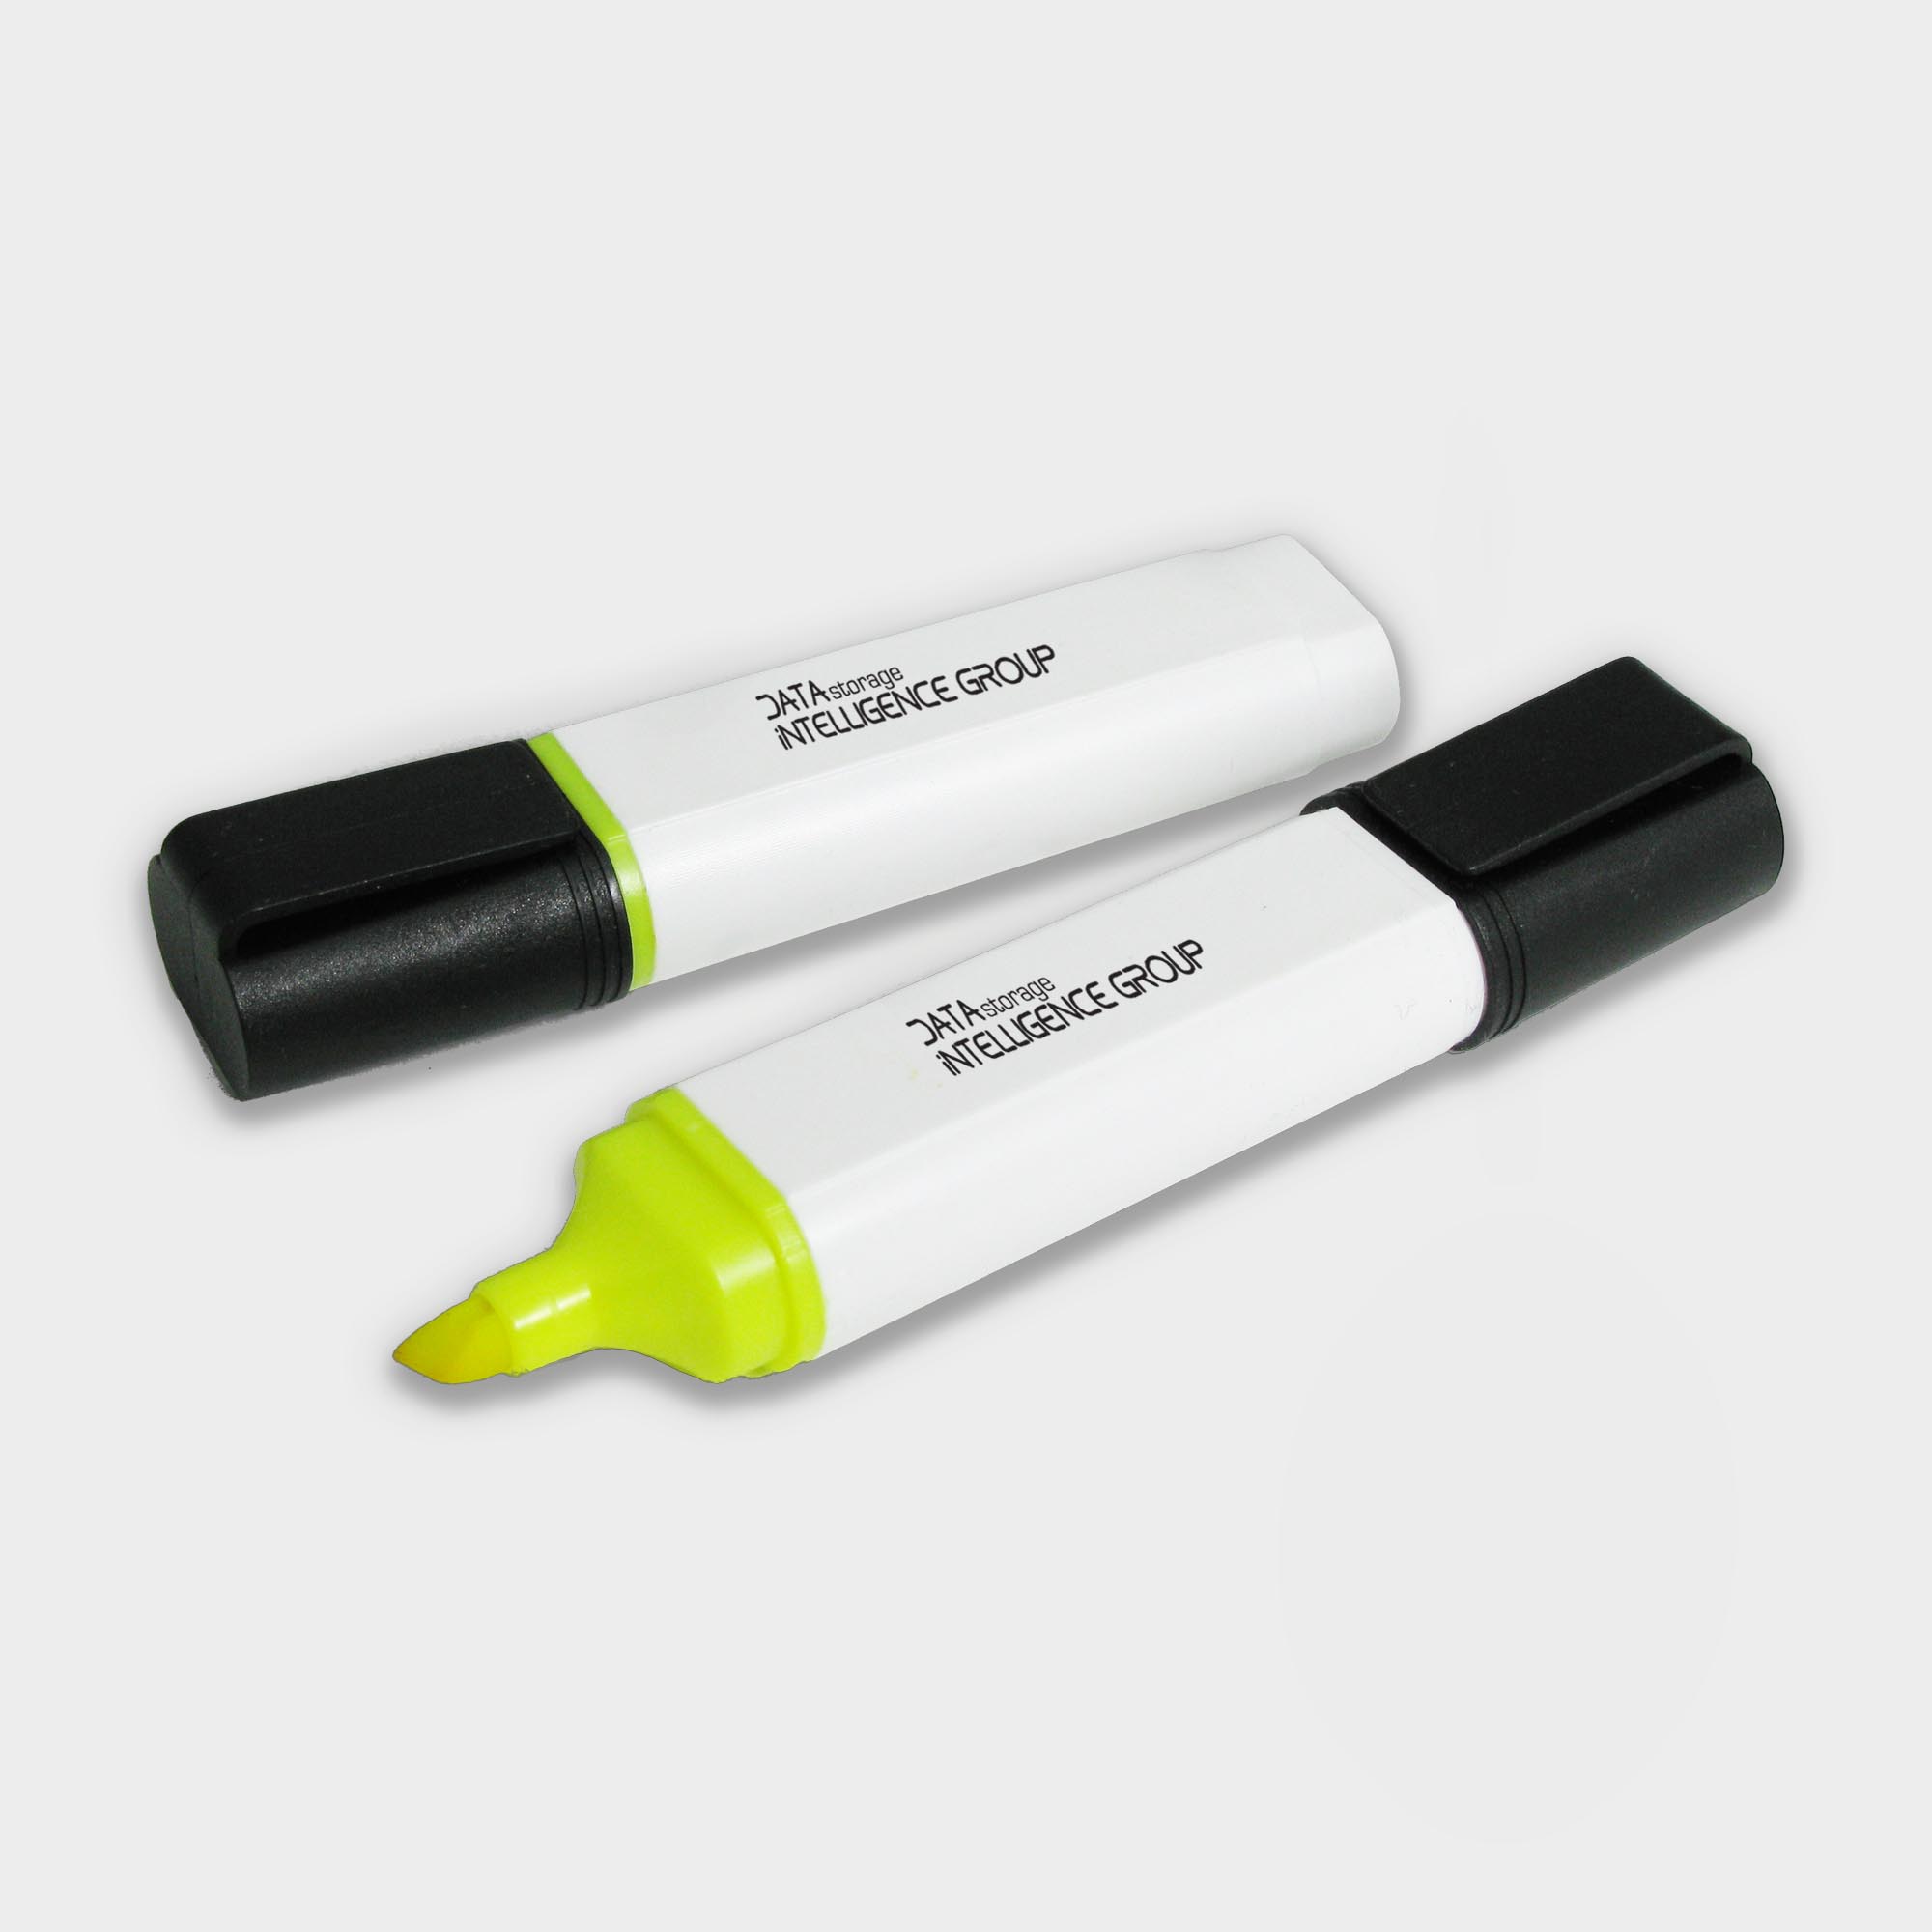 The Green & Good Highlighter Pen made from recycled plastic. A practical highlighter made in the EU. It is ideal for home, school or office use and is available with a white or yellow barrel and a black lid. Yellow insert as standard. White / Black